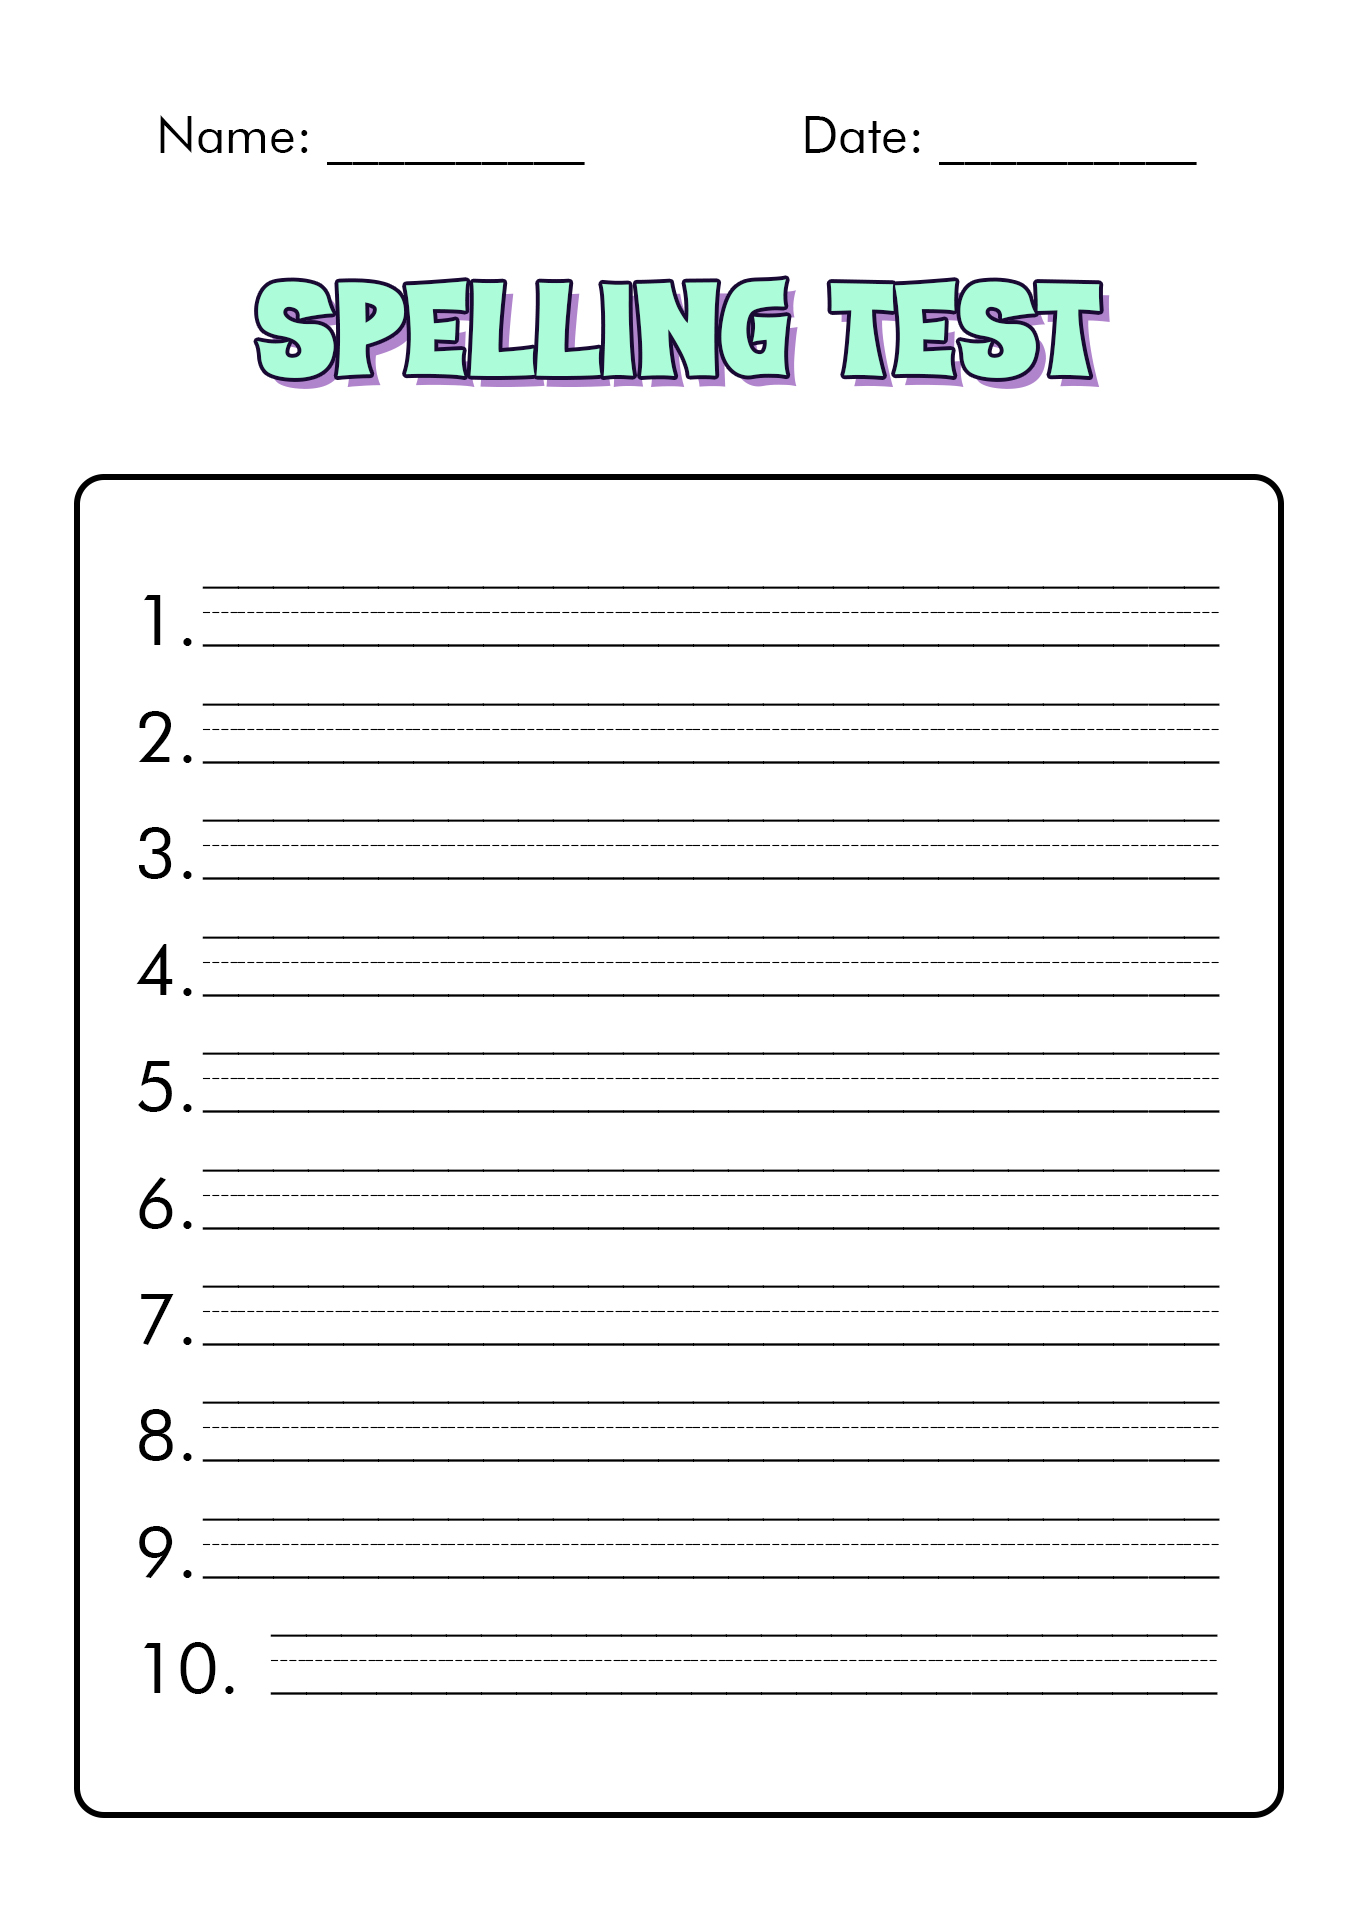 Spelling Test Template Image